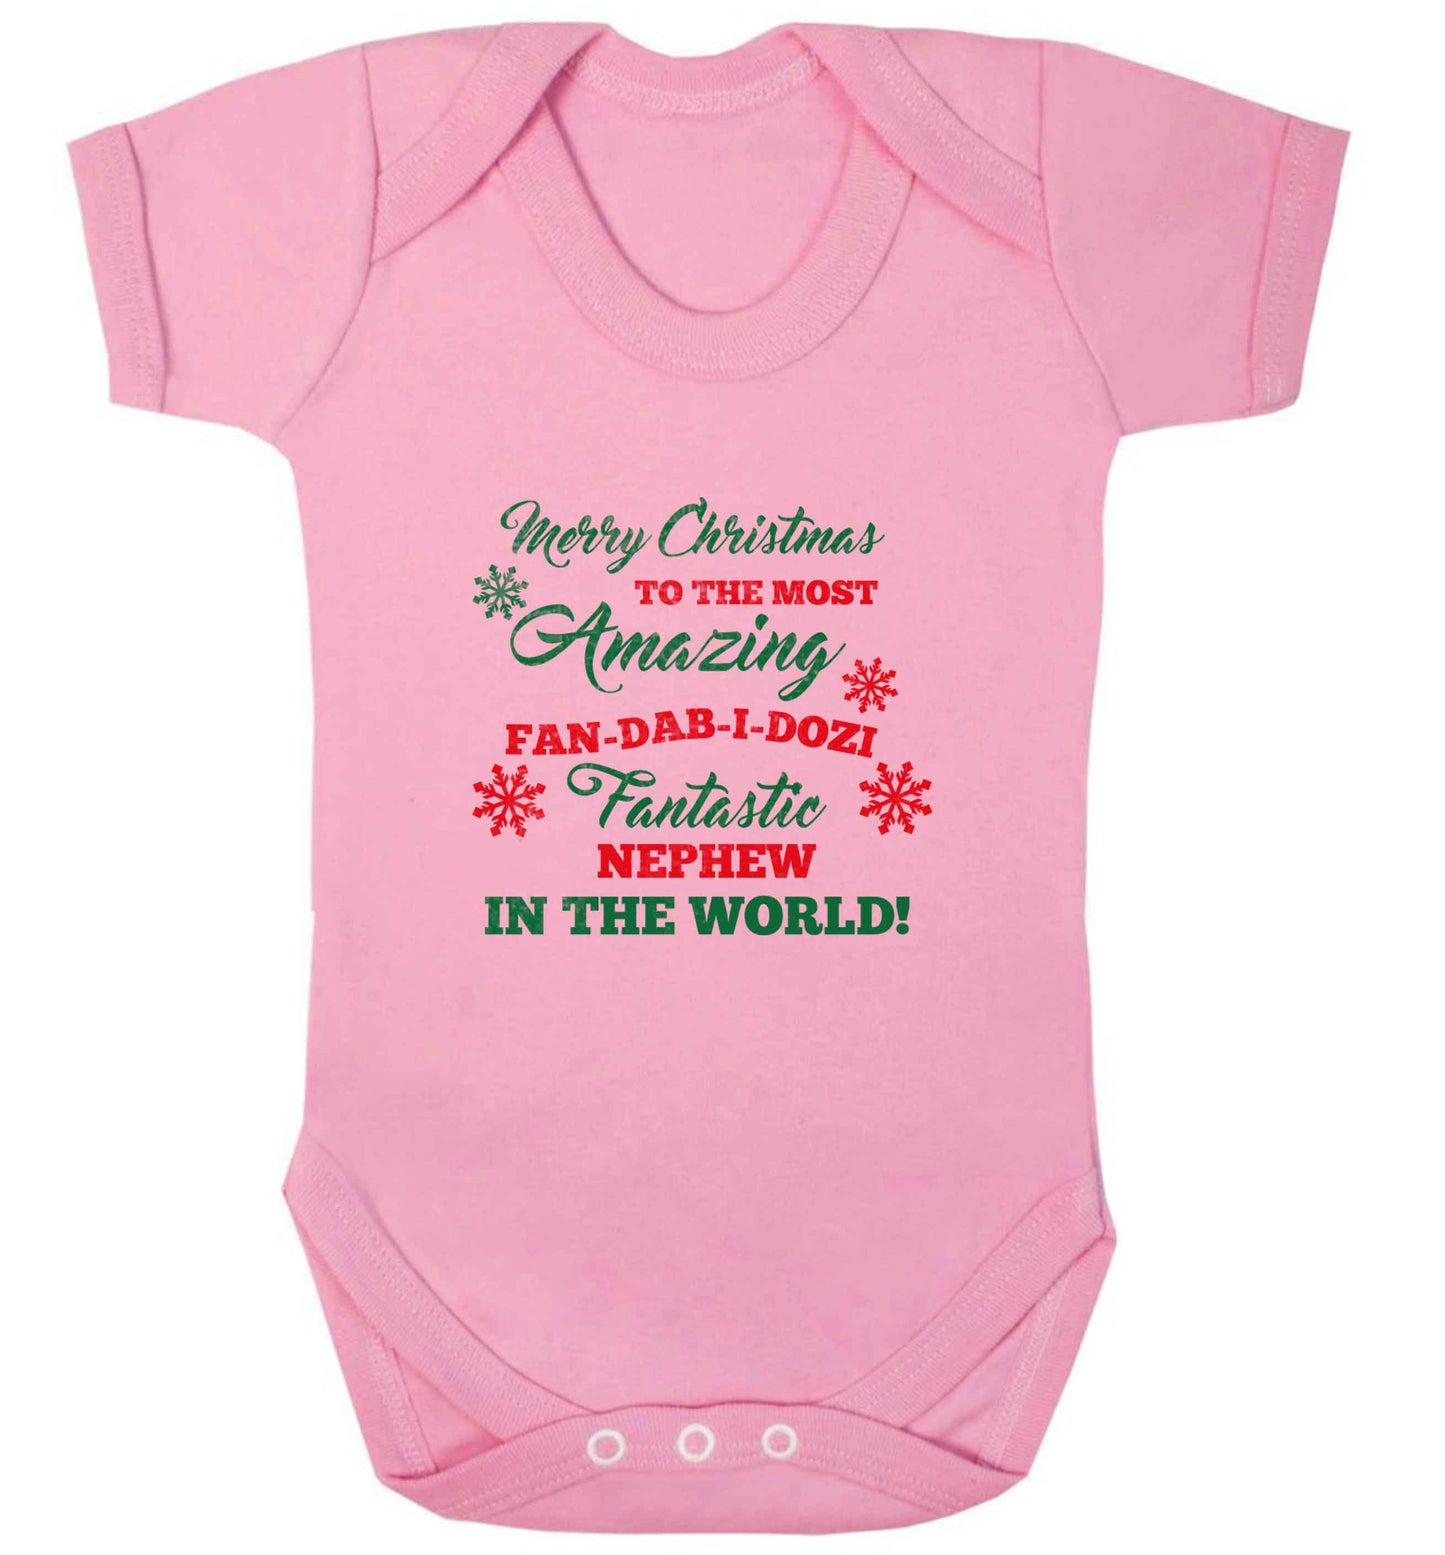 Merry Christmas to the most amazing fan-dab-i-dozi fantasic Nephew in the world baby vest pale pink 18-24 months